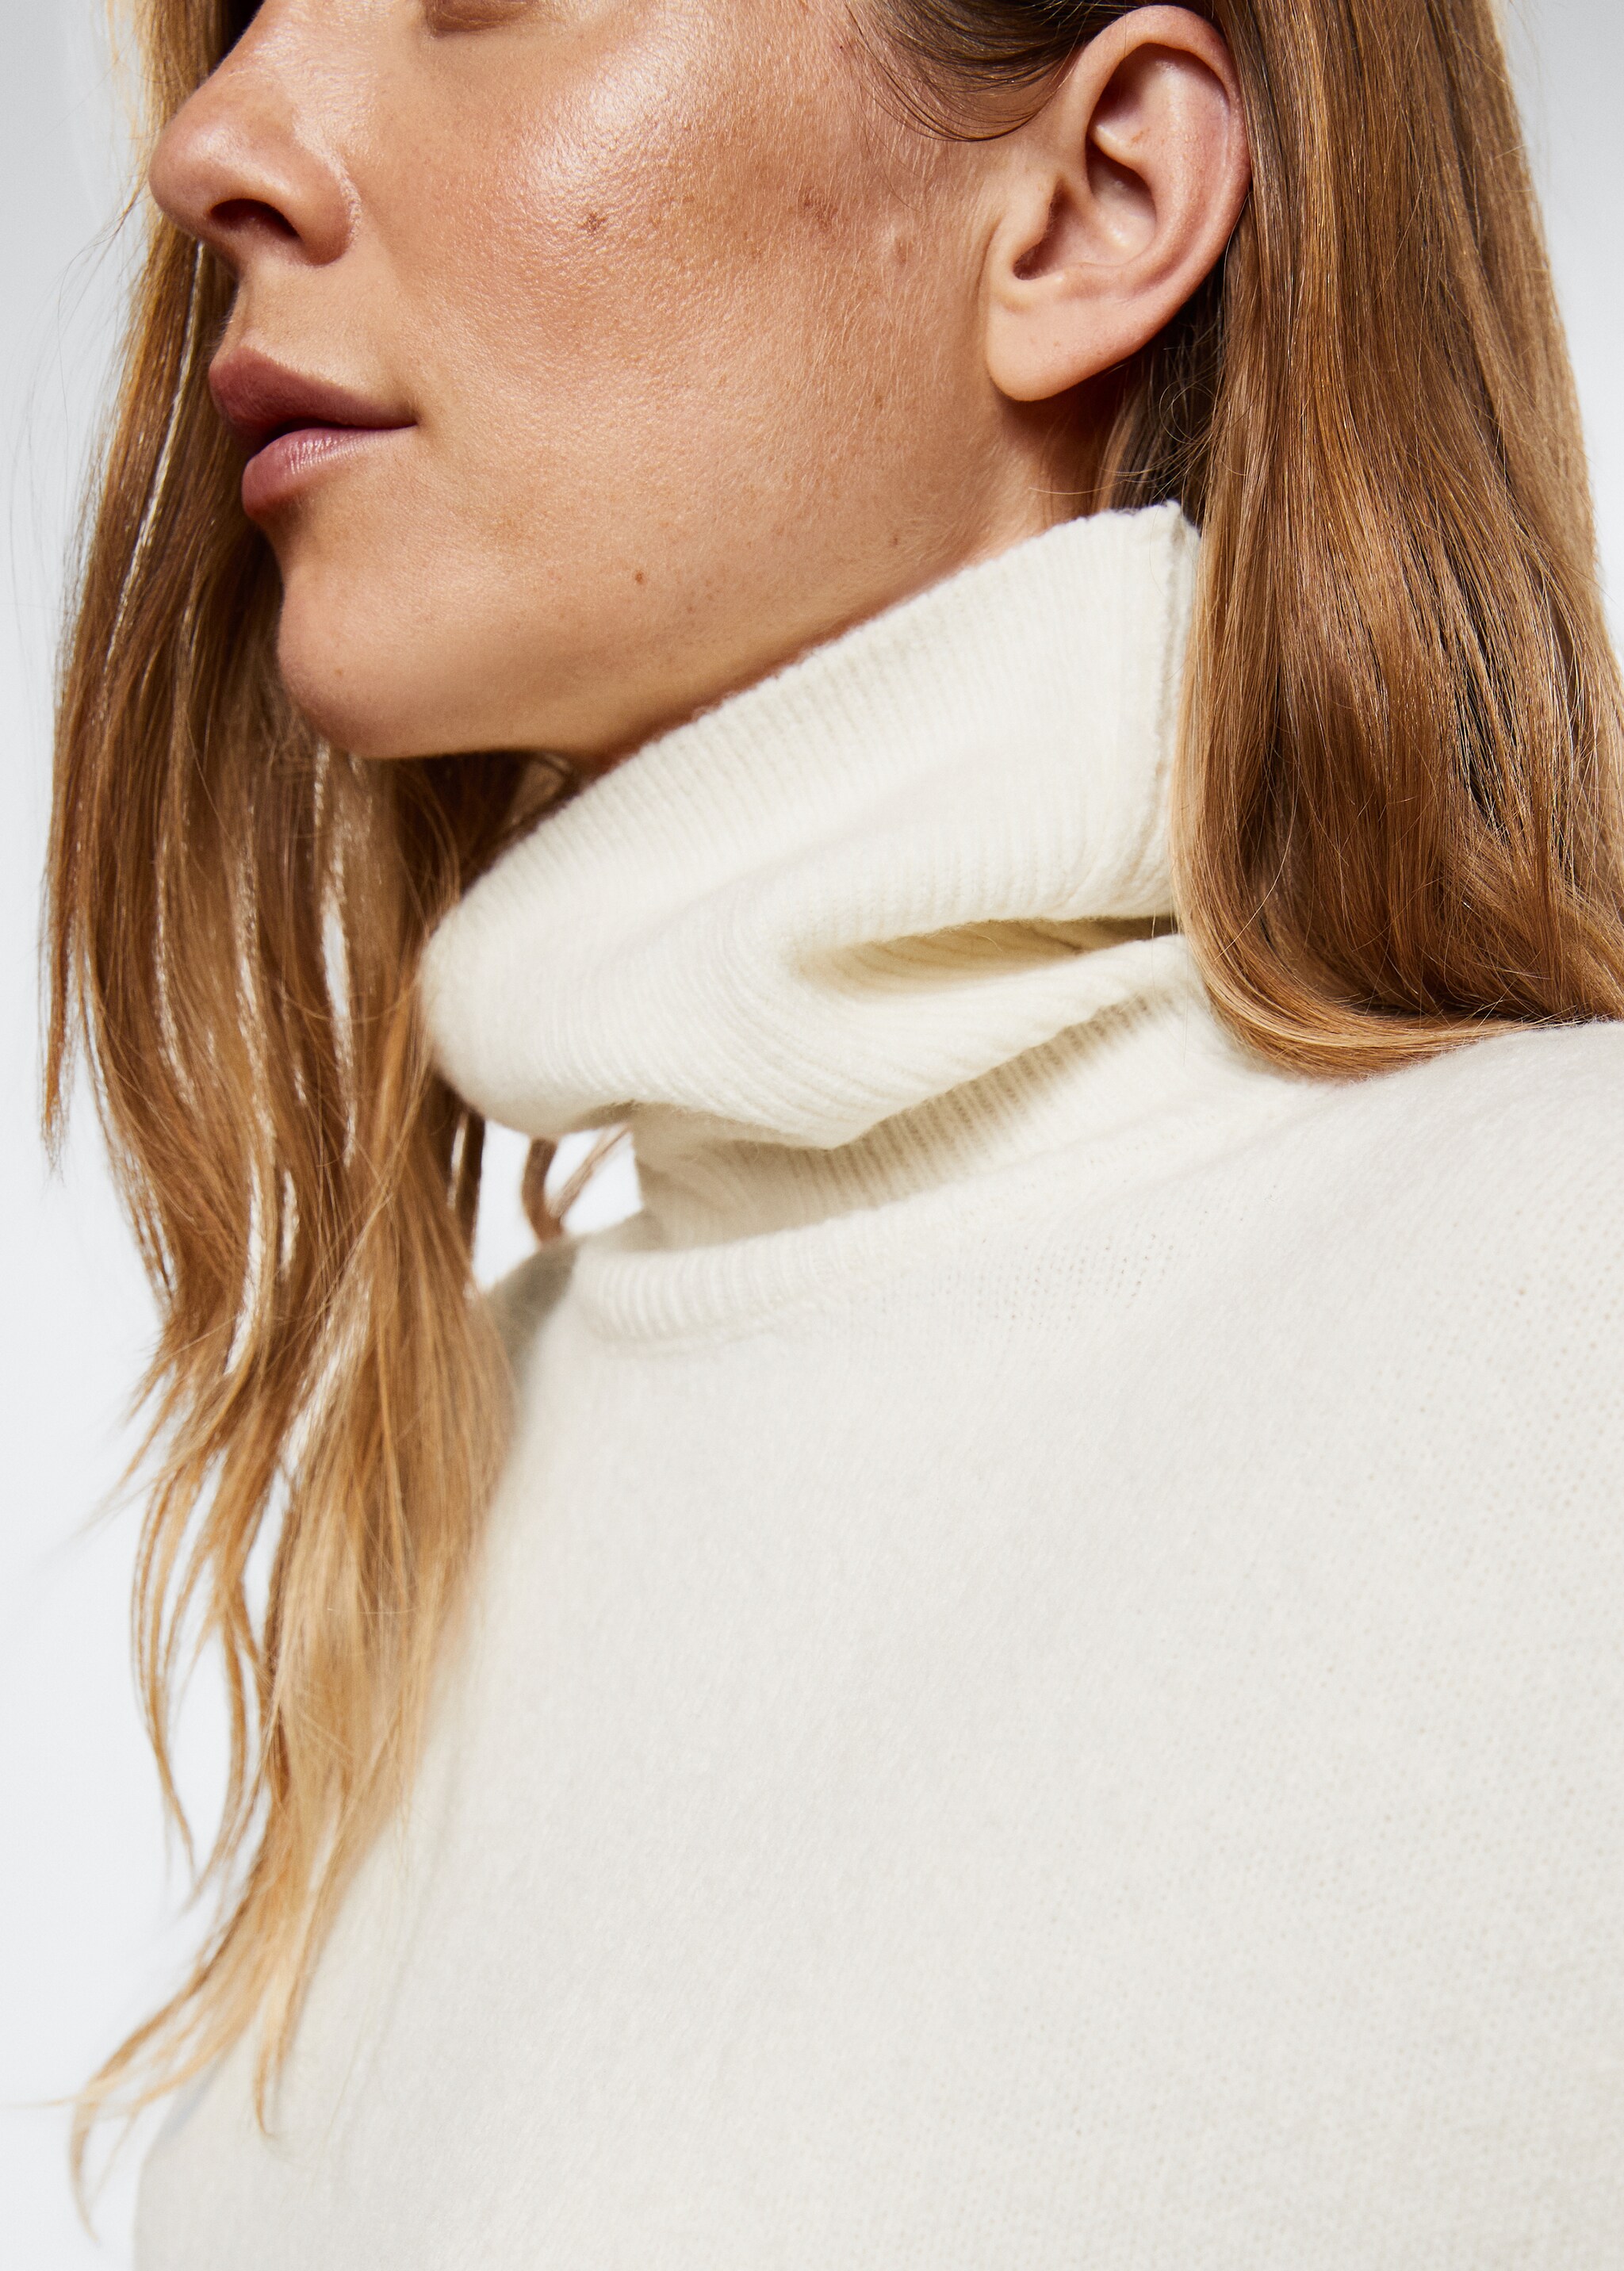 Turtle neck dress - Details of the article 6